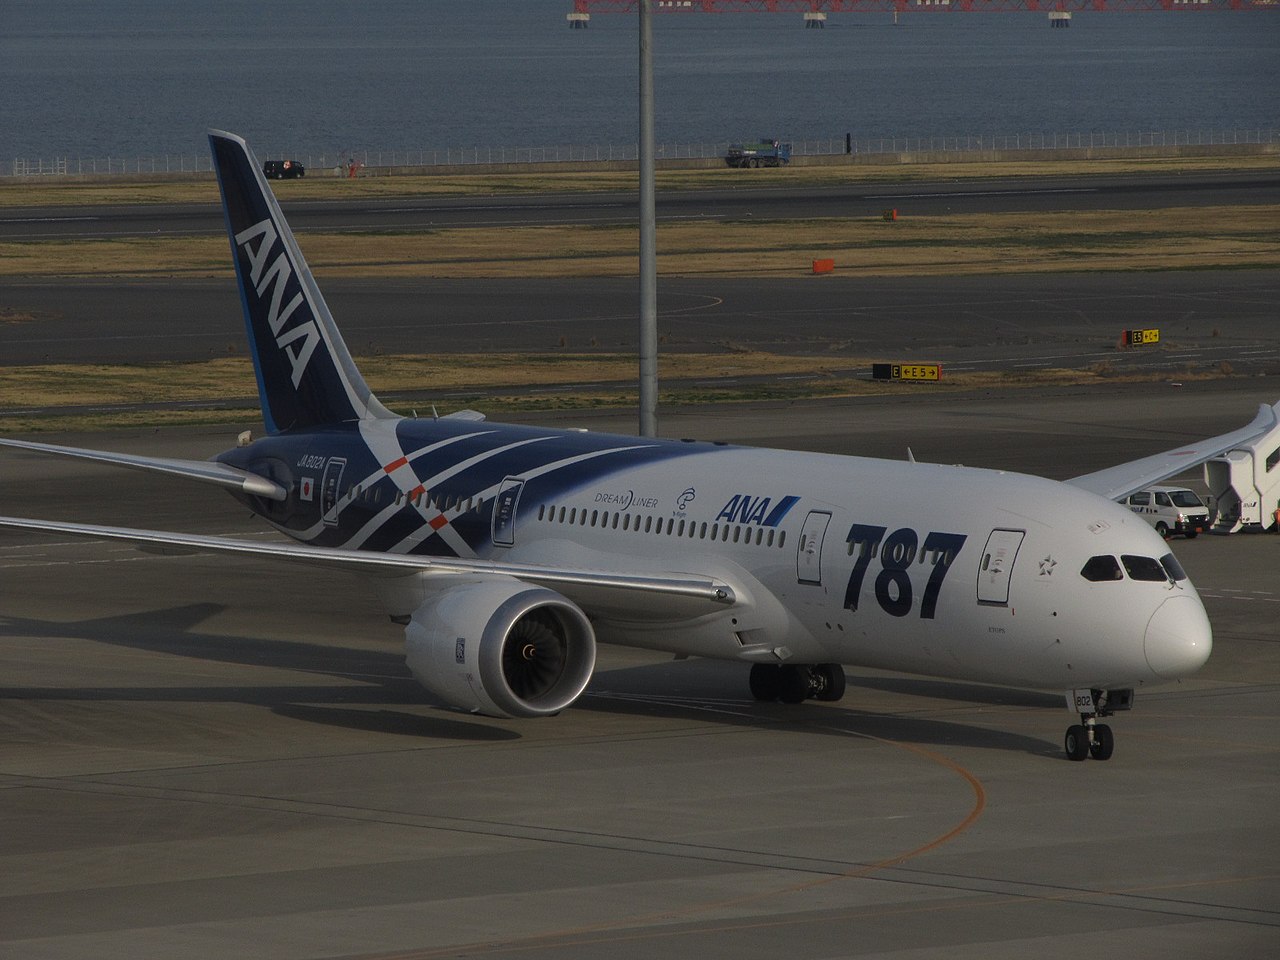 An ANA Boeing 787 Dreamliner at Tokyo Airport.